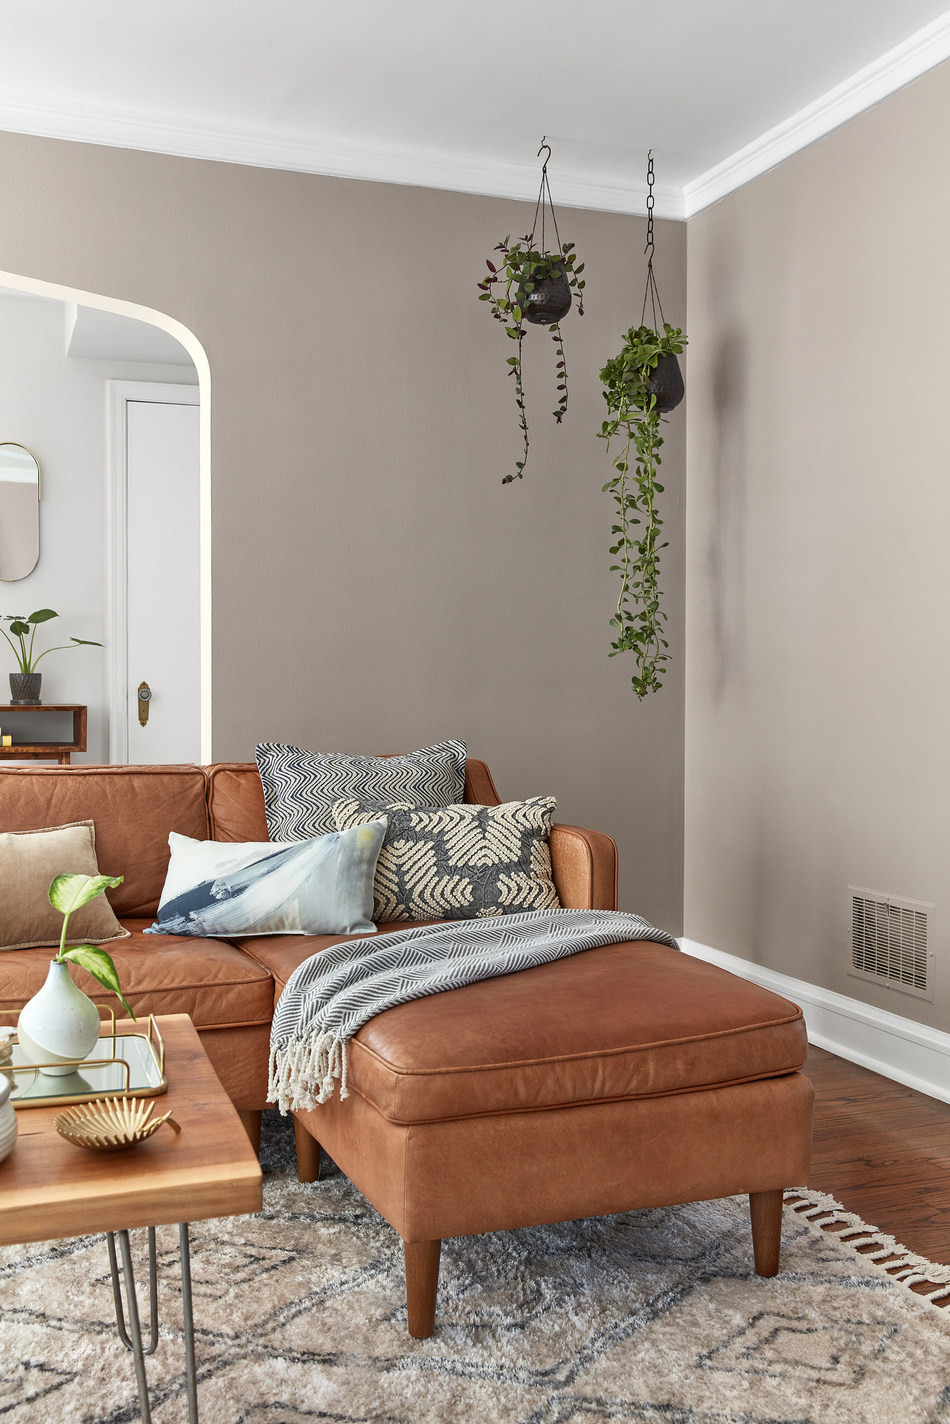 Best Bedroom Paint Colors 2020
 Valspar Announces 2020 Colors of the Year Inspired by Nature